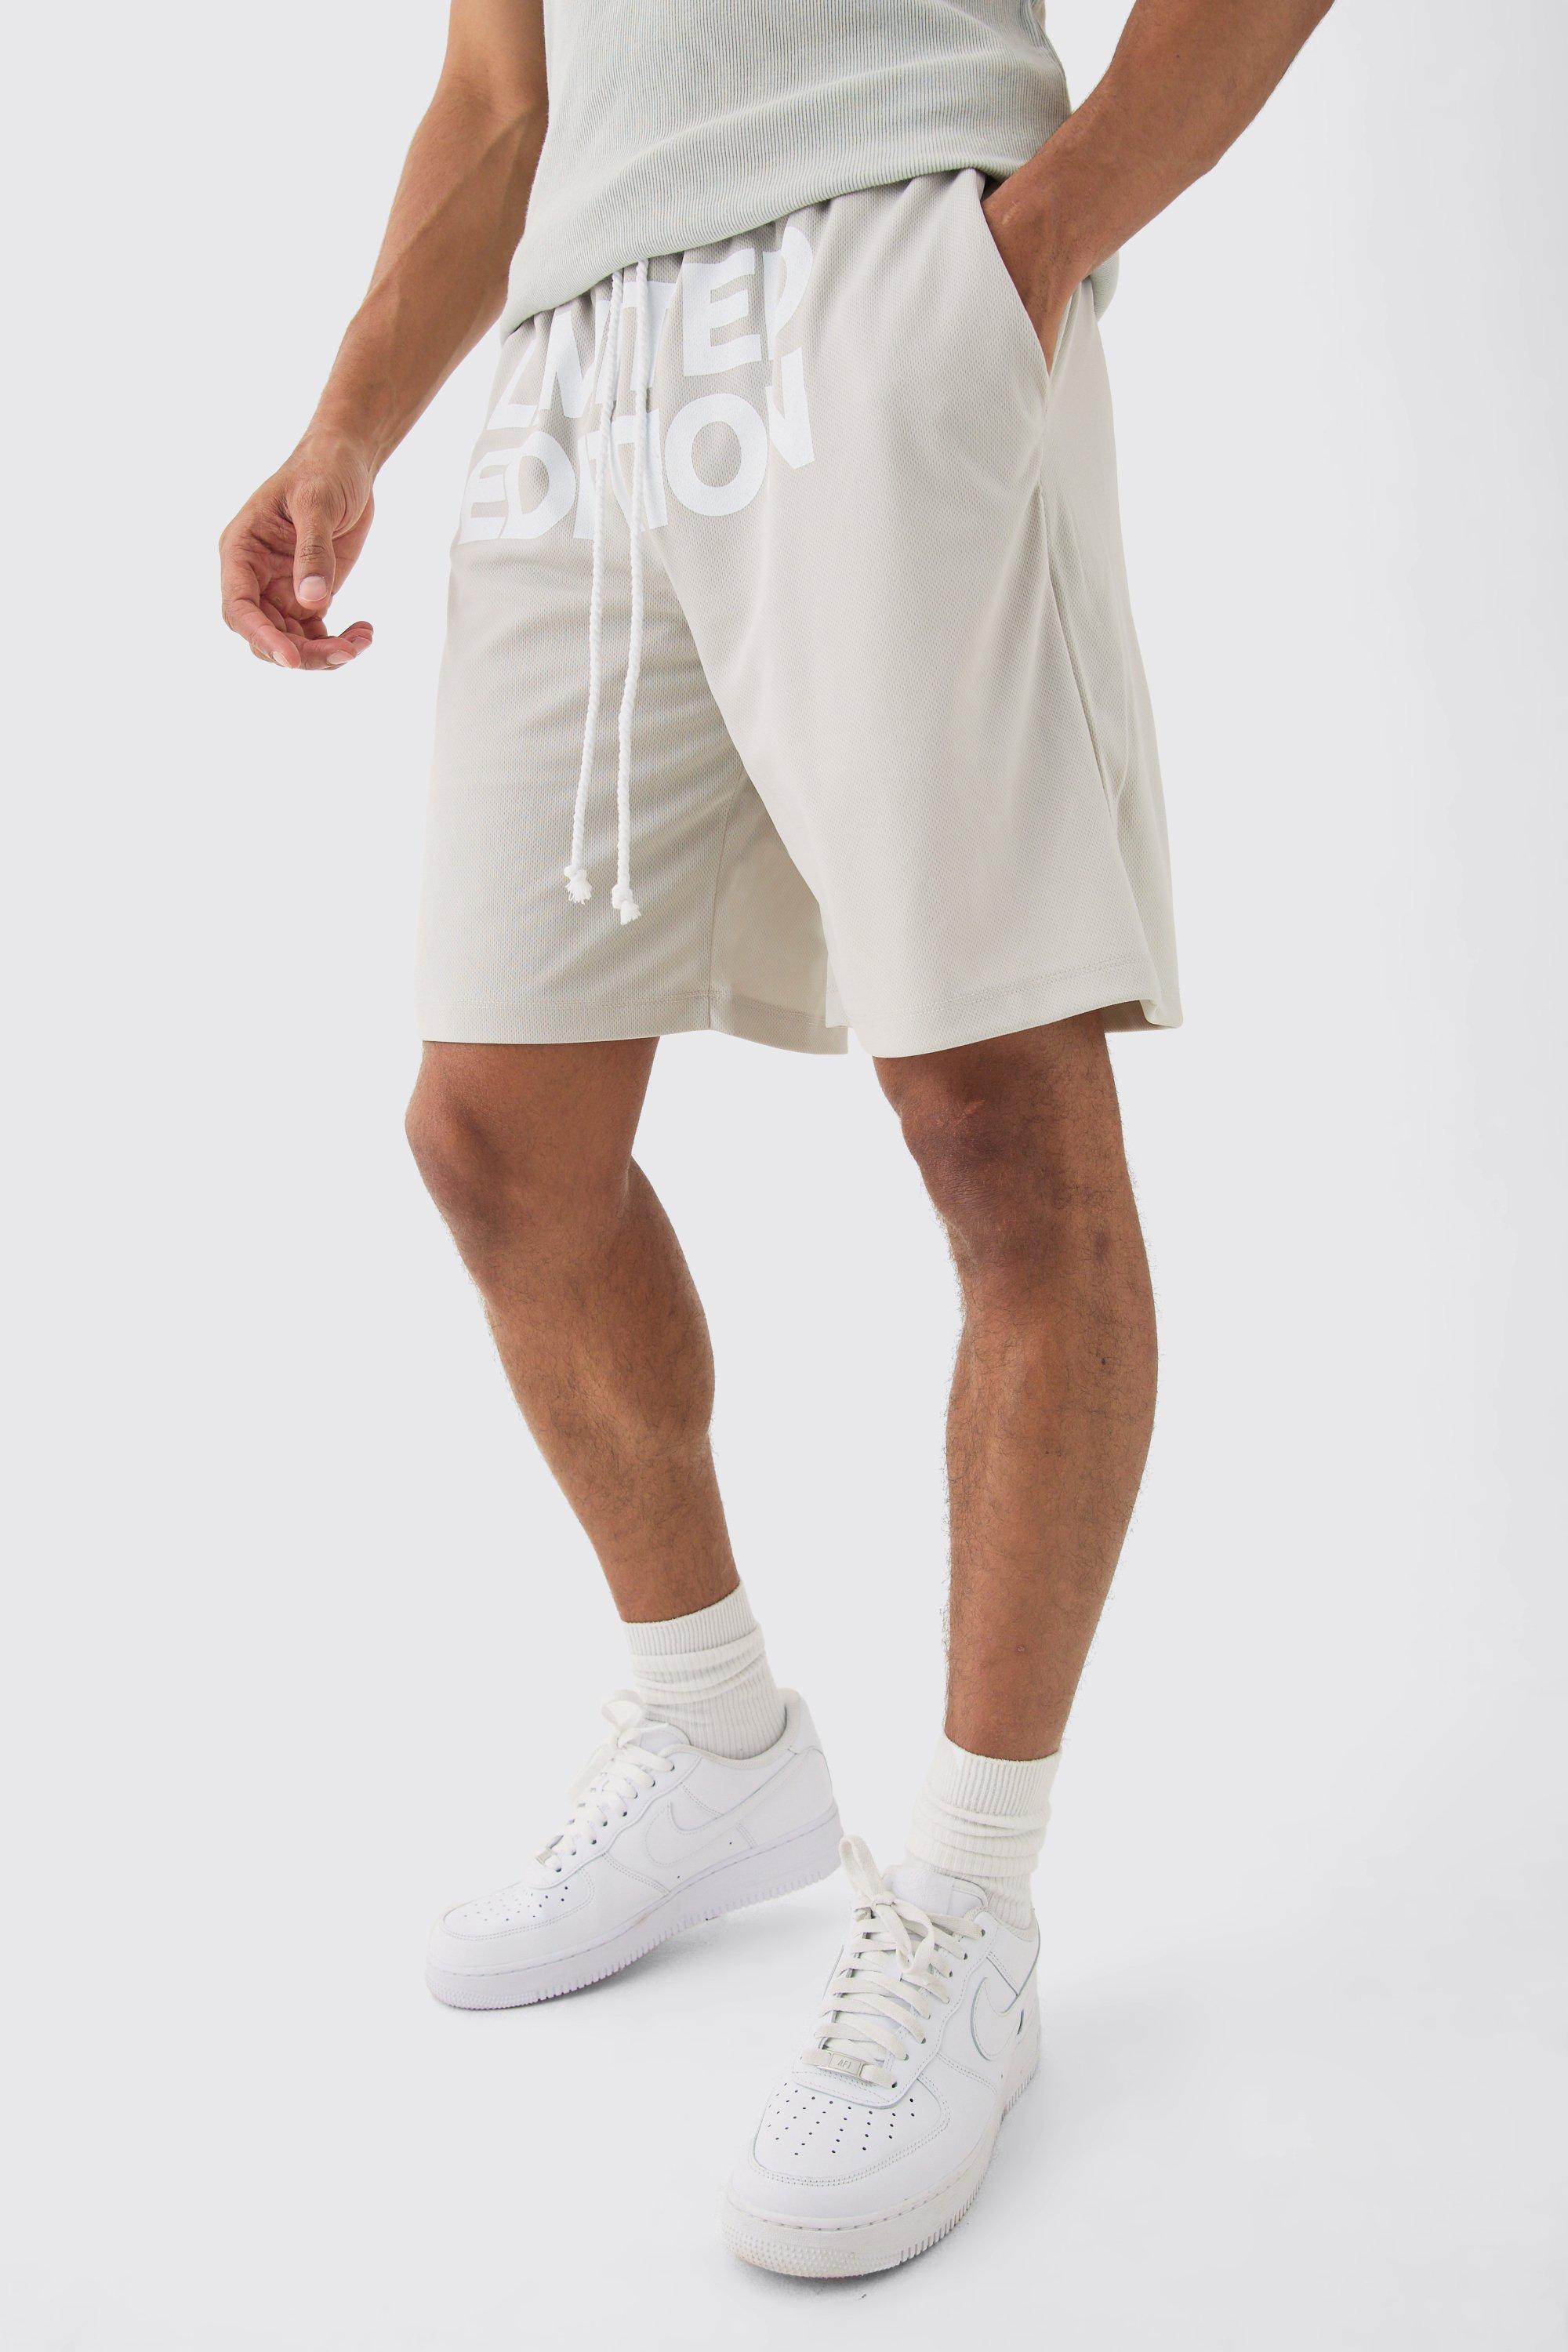 Image of Relaxed Mid Length Limited Edition Mesh Shorts, Grigio